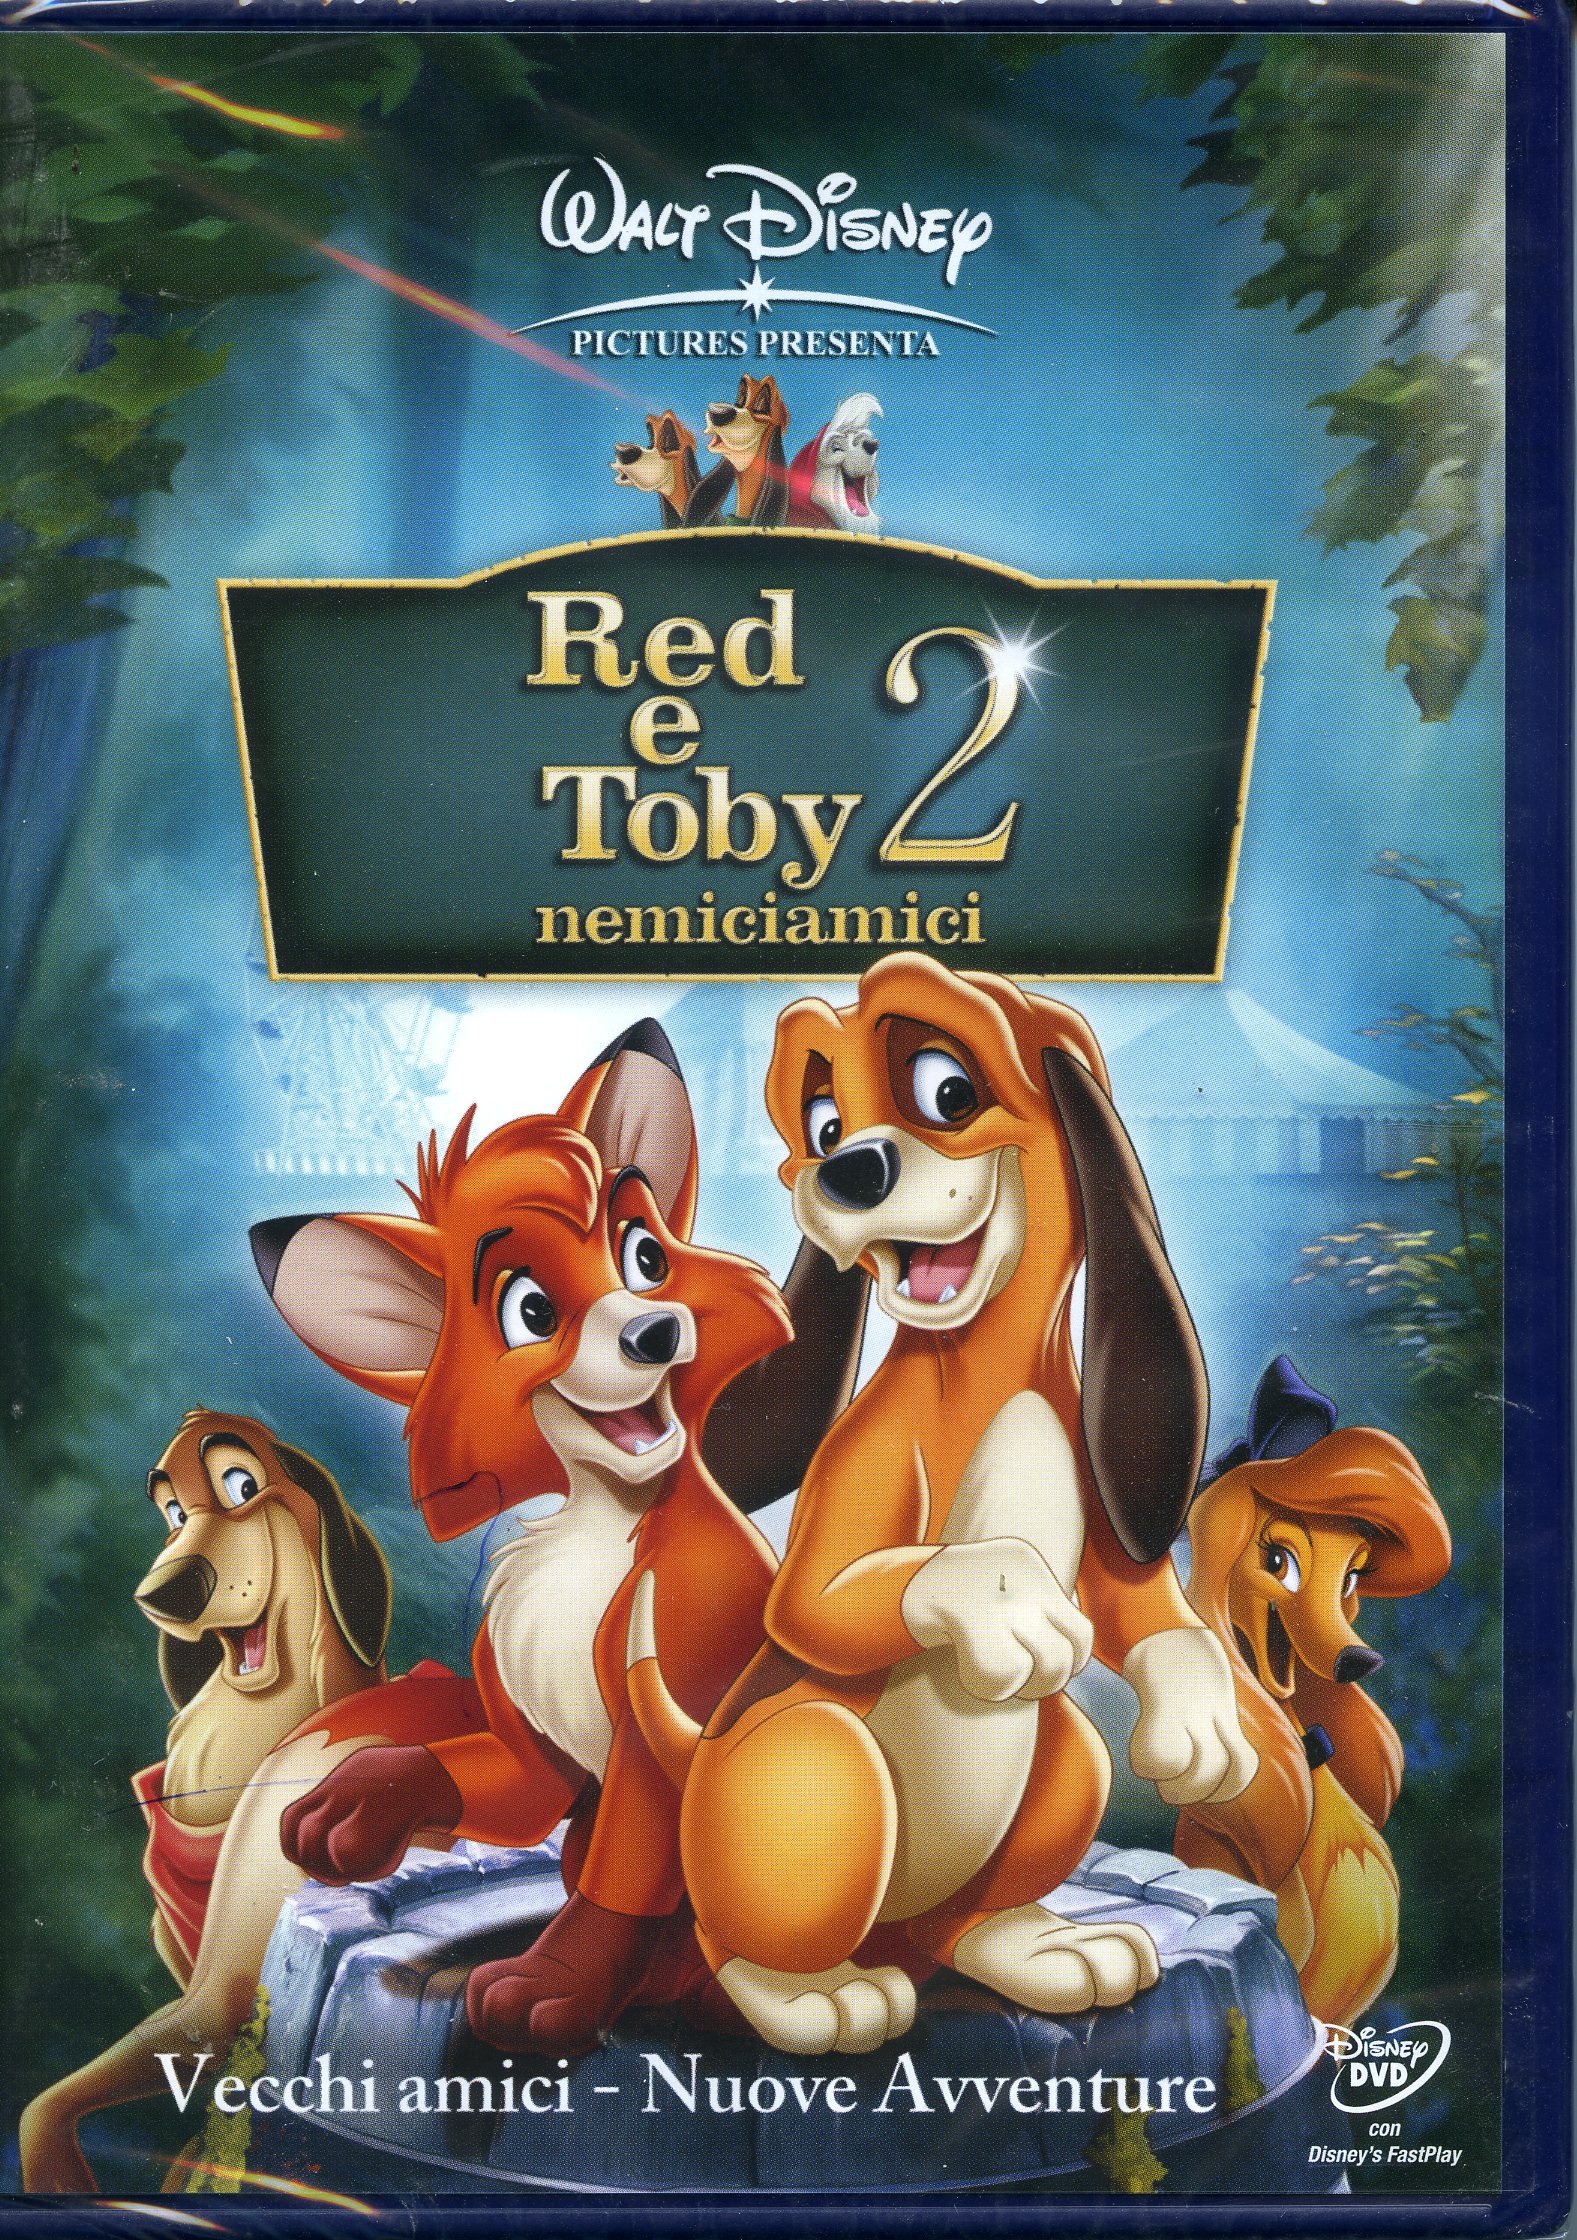 RED E TOBY 2